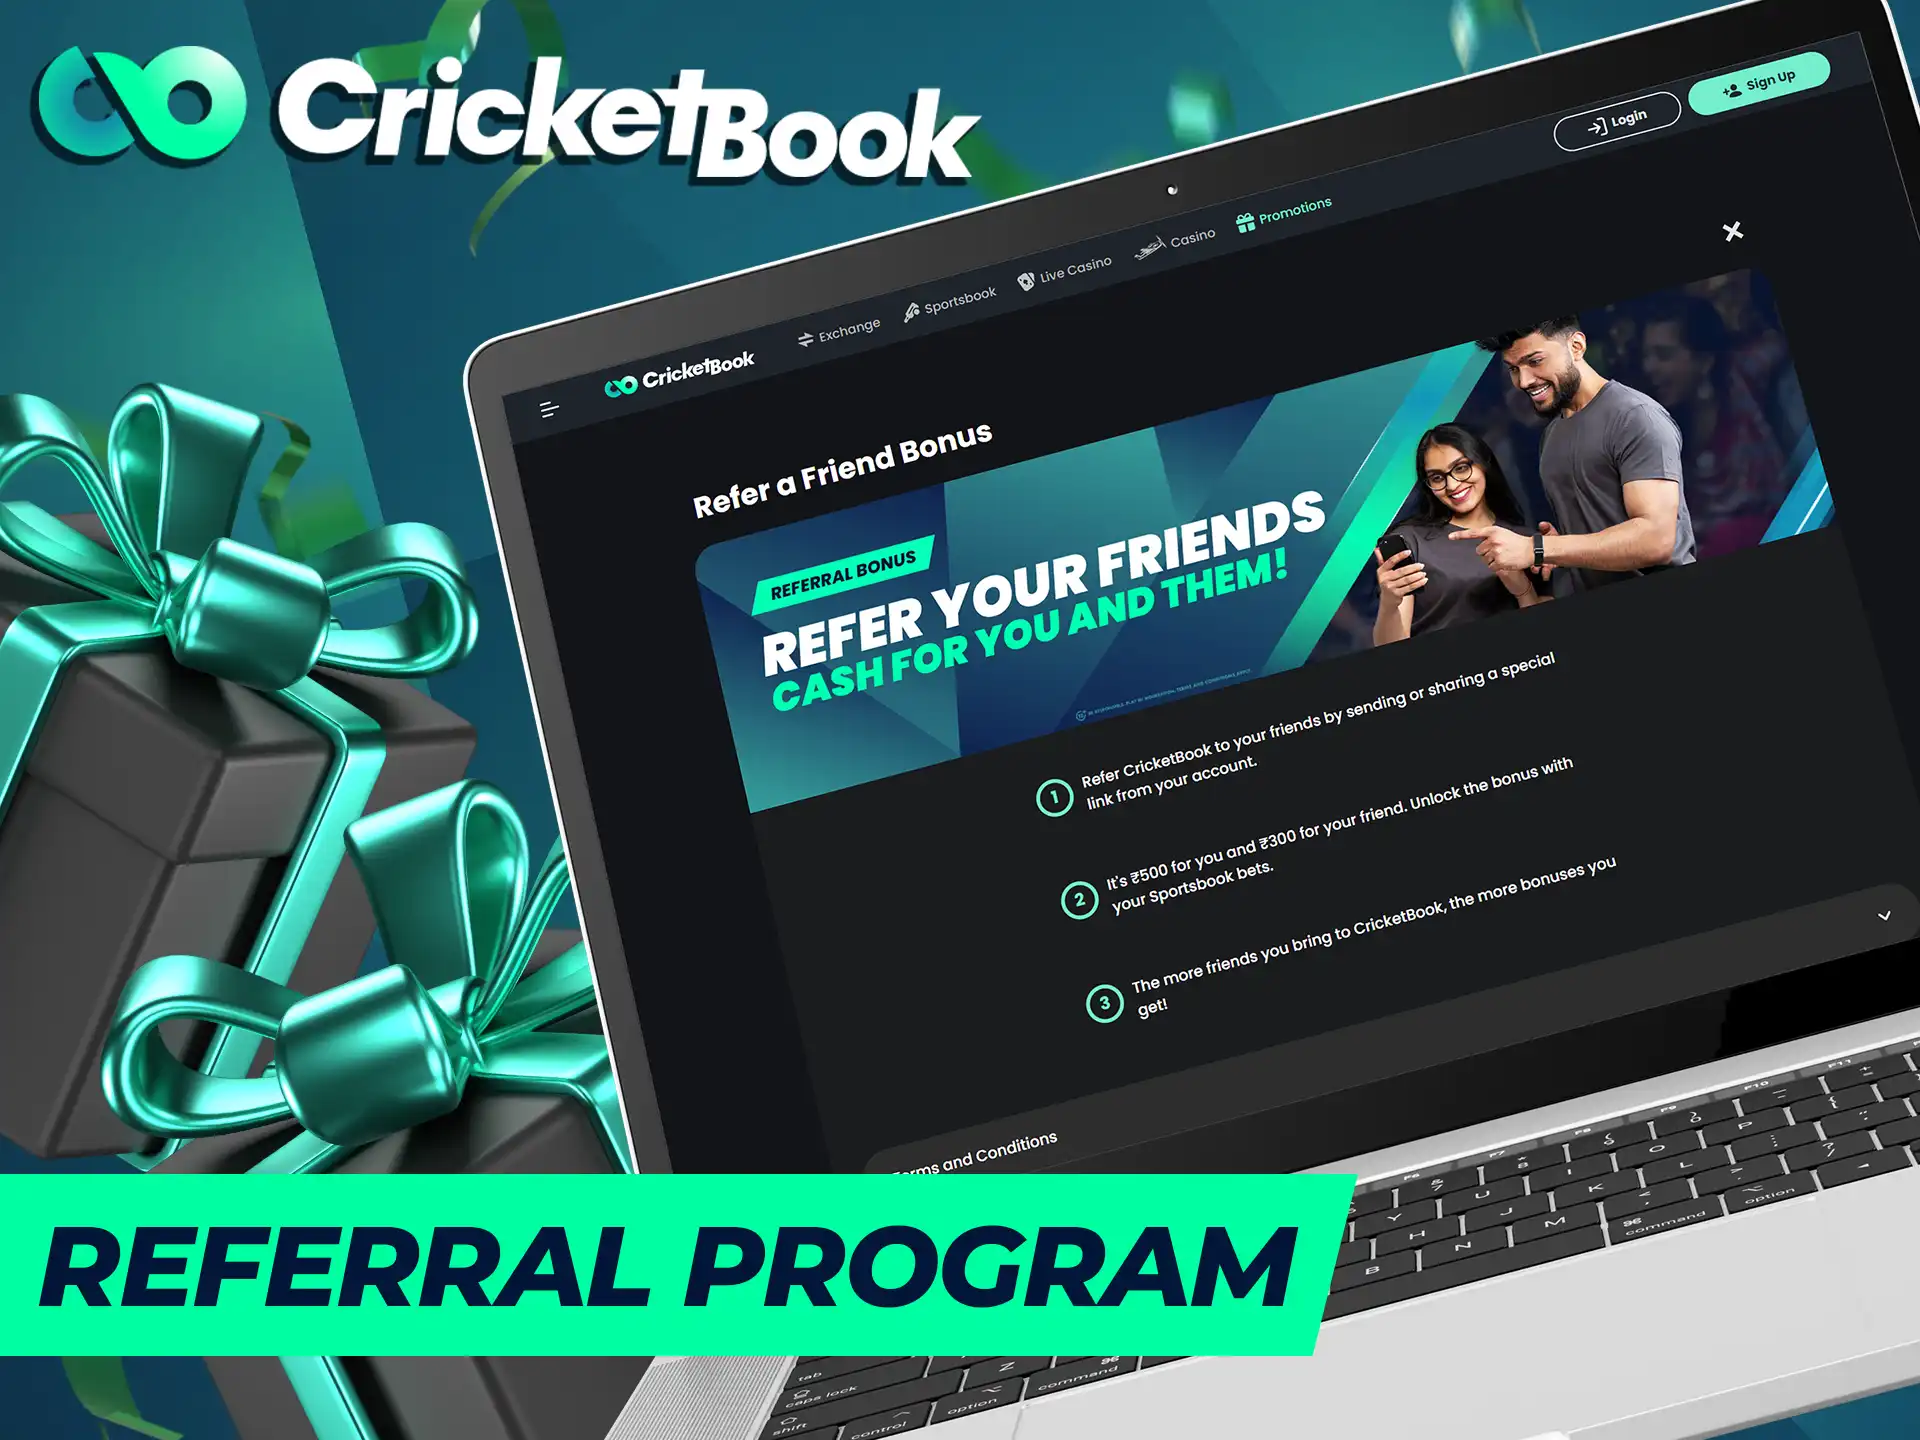 Invite your friend to CricketBook and get rewarded.